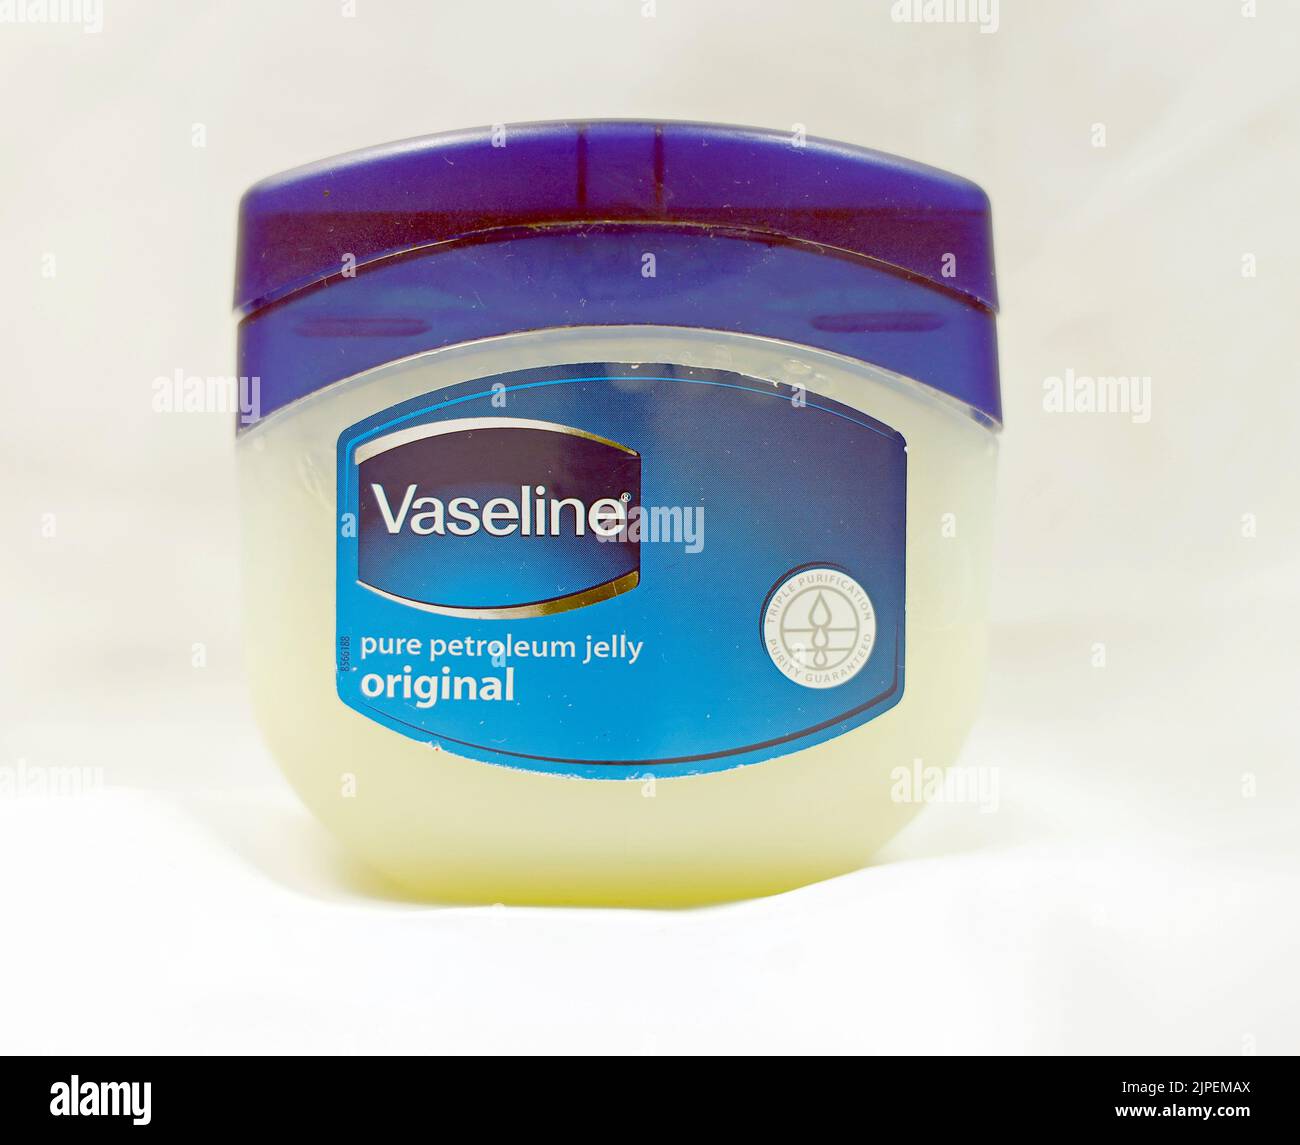 Vaseline petroleum jelly. Plastic tub / container with blue lid against white/grey background Stock Photo